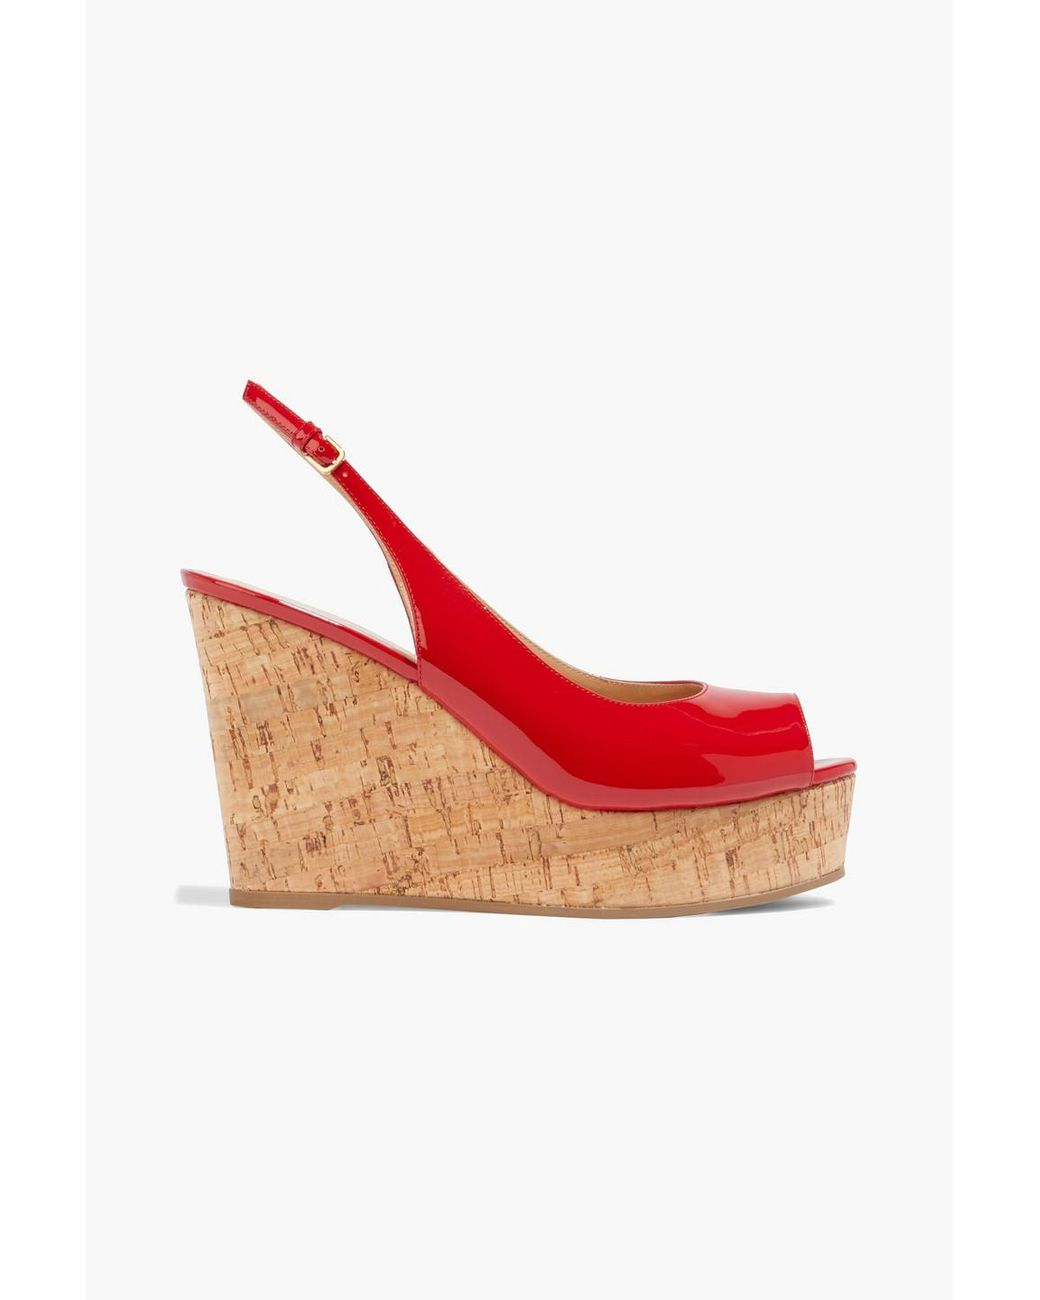 Sergio Rossi Patent-leather Cork Wedge Slingback Sandals in Red | Lyst